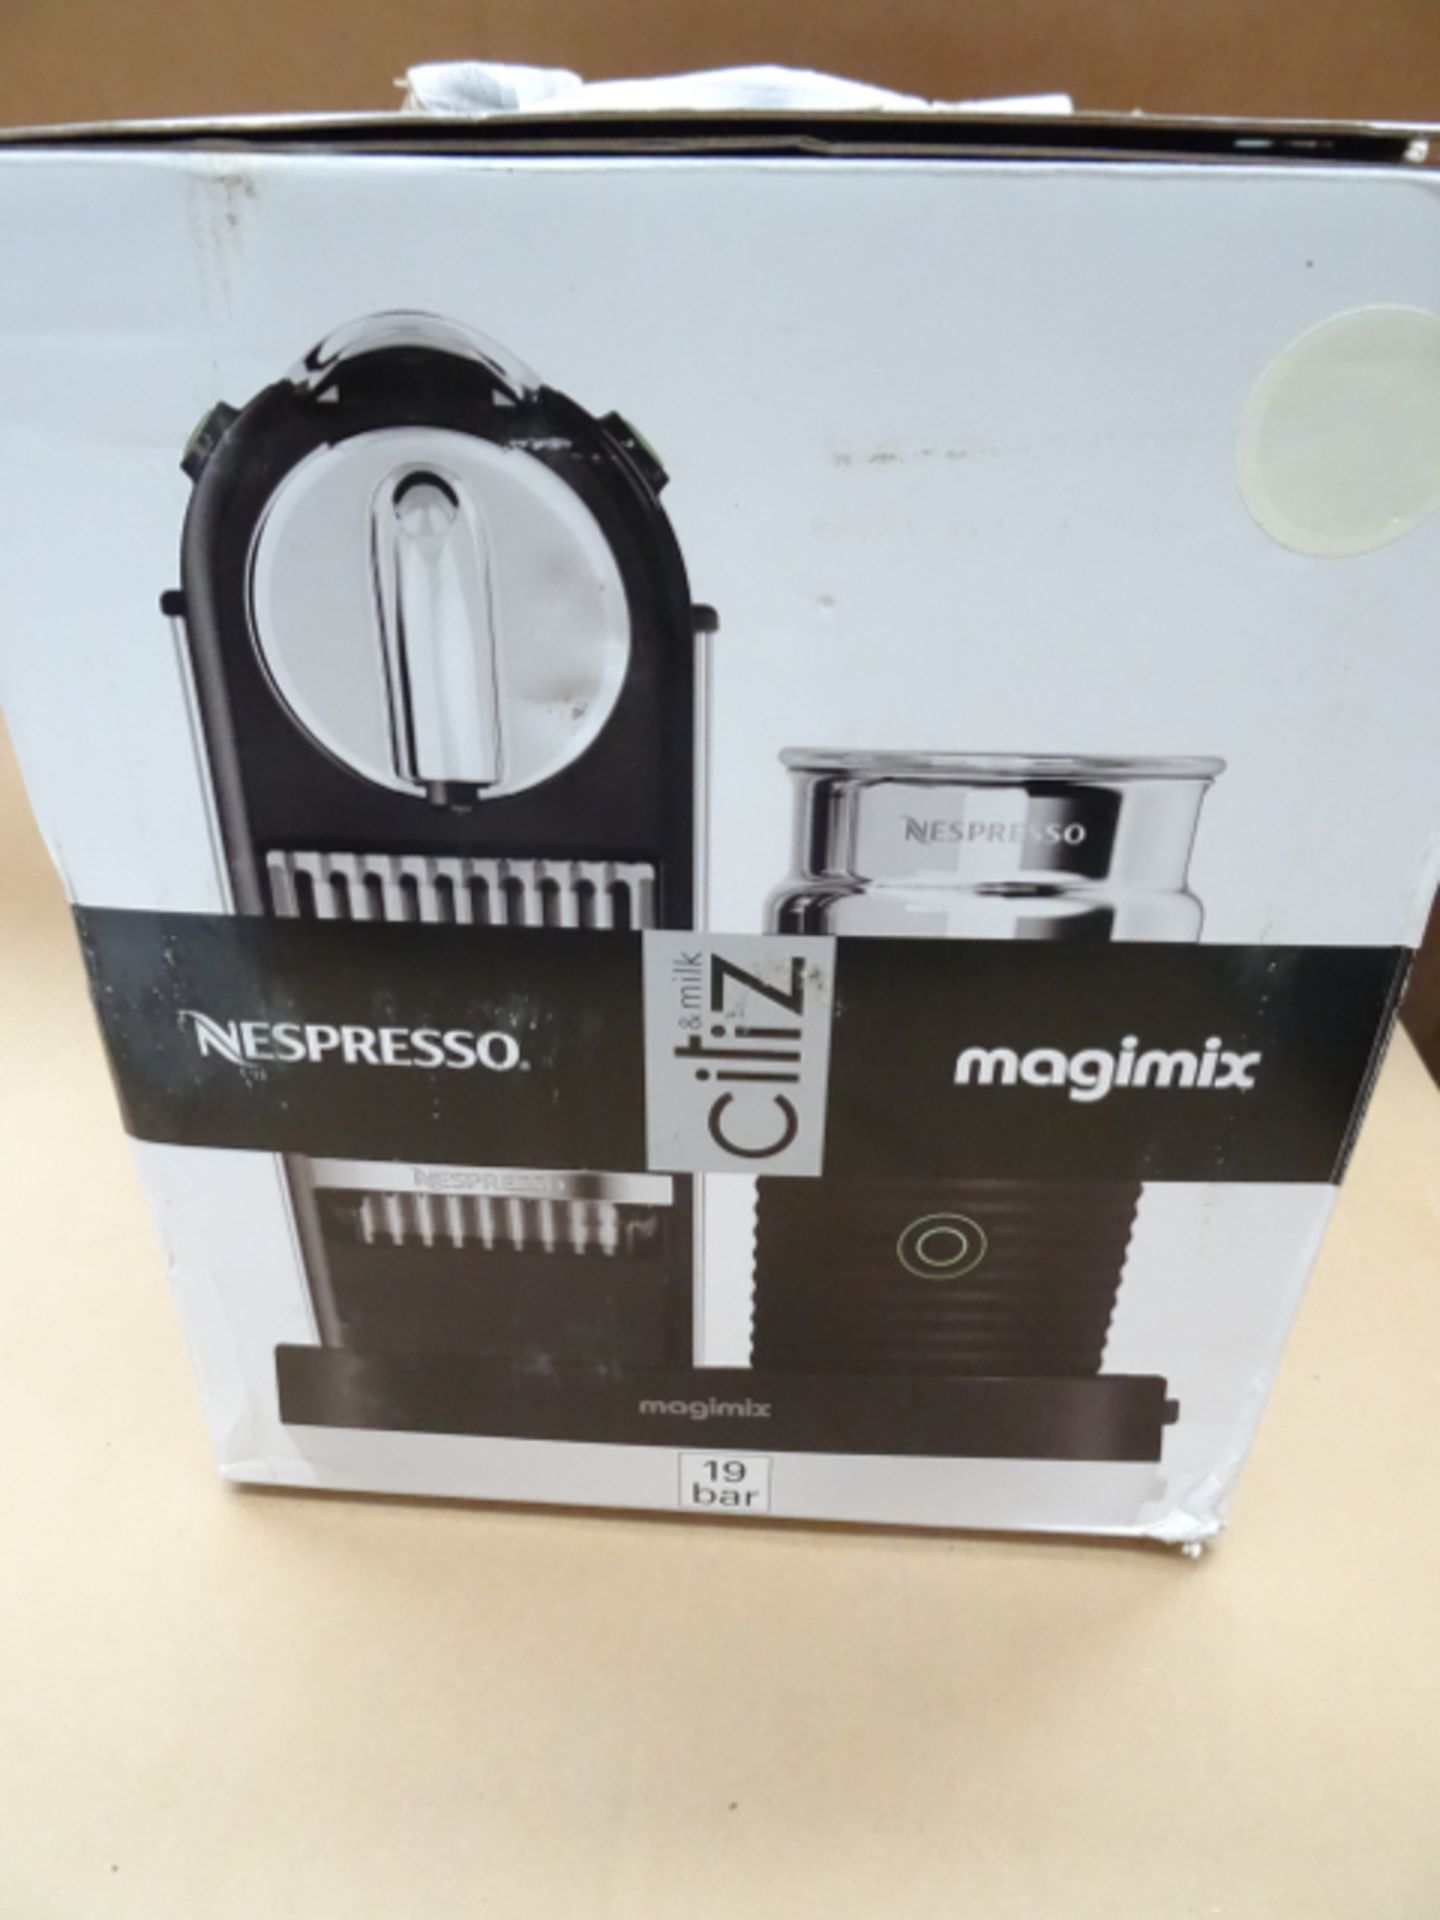 1 x Nespresso CitiZ and Milk by Magimix M190. (Black) RRP £199 Product Description

The Magimix - Image 2 of 2